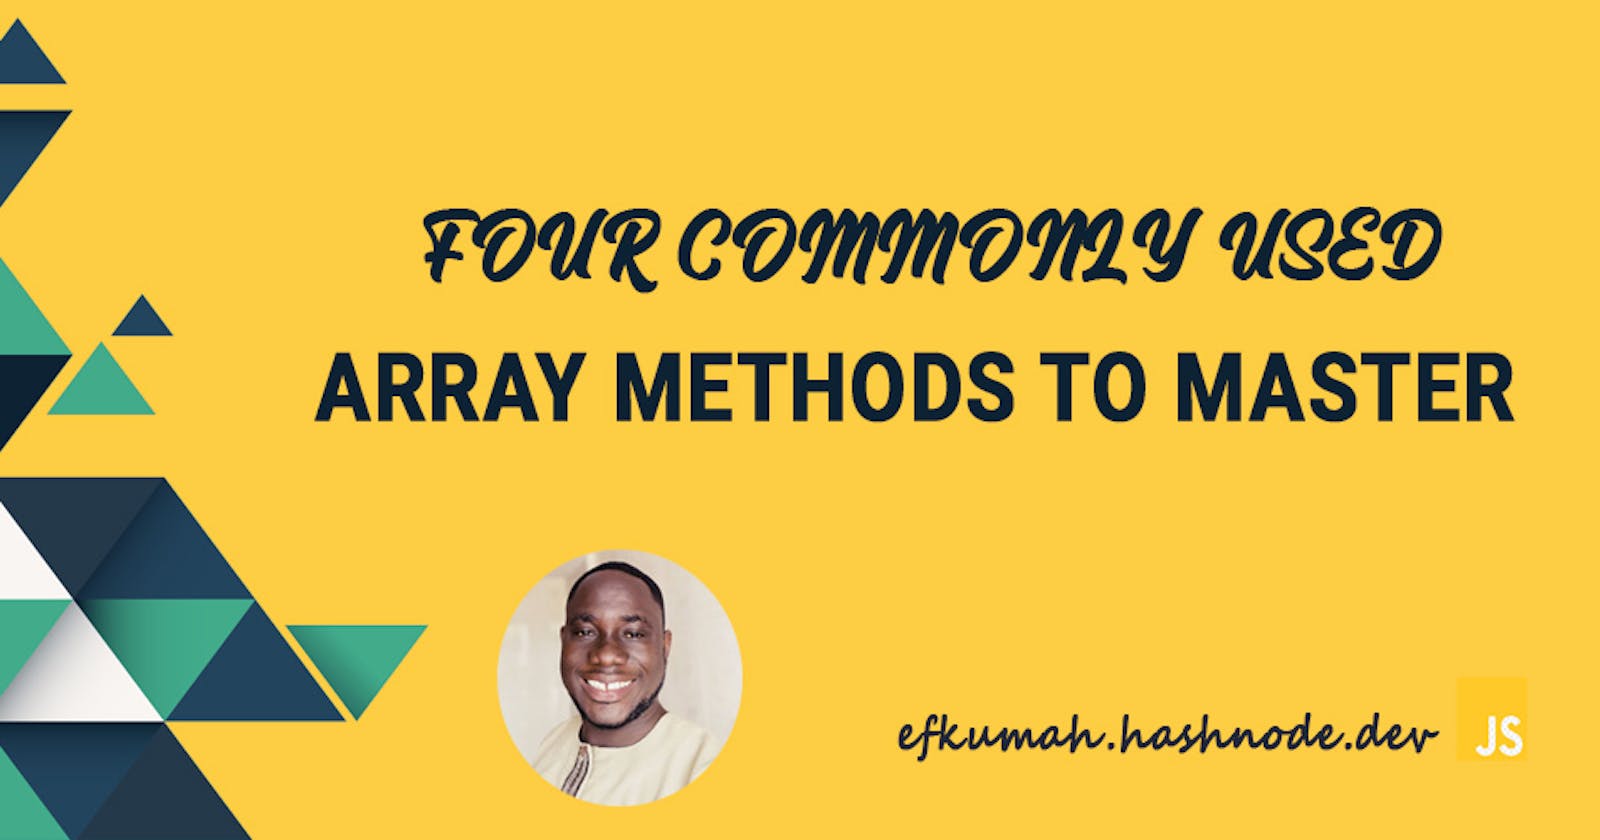 Four commonly used array methods to master